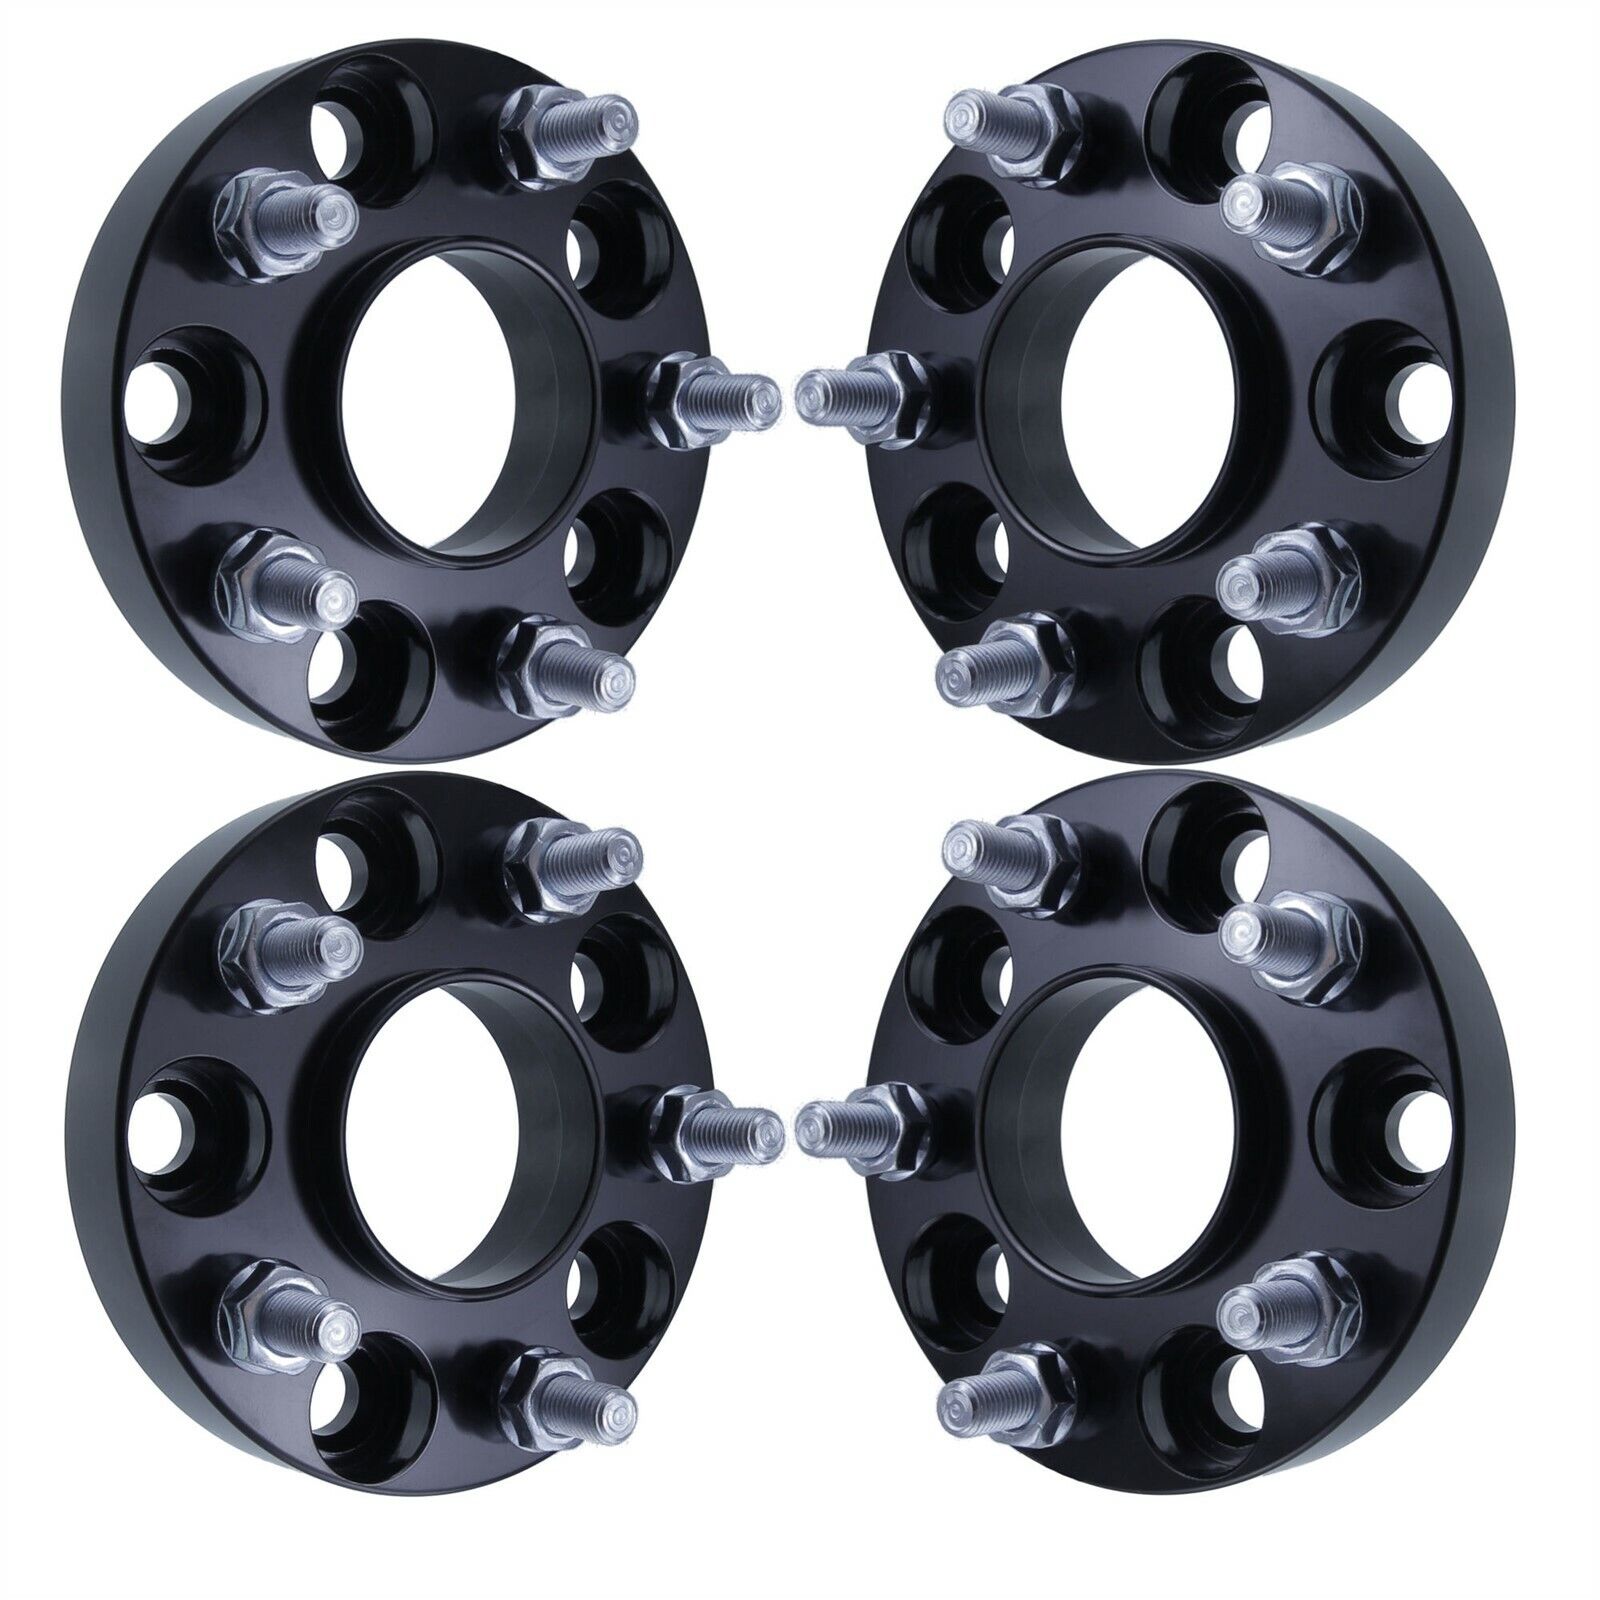 4x Hubcentric Wheel Spacers 25mm Fits Mitsubishi Lancer Outlander Eclipse Galant